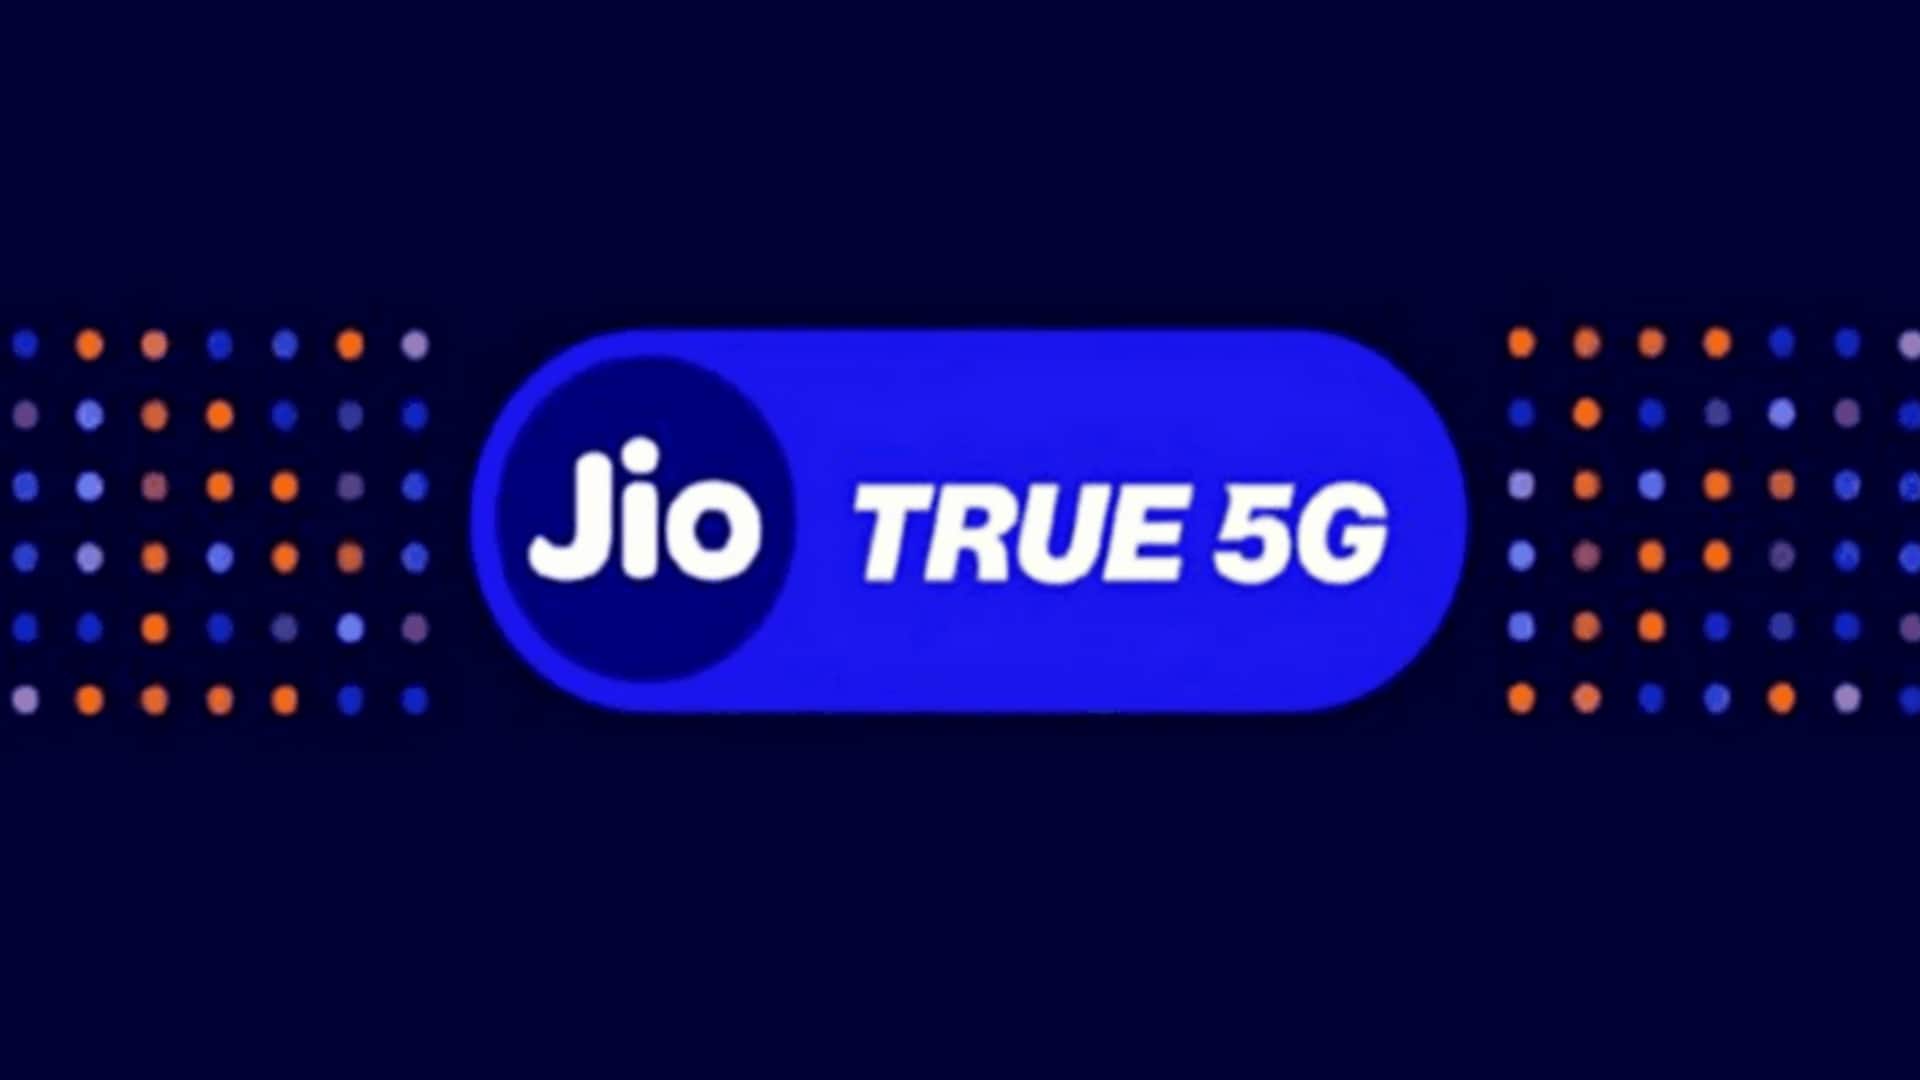 Jio launches 5G in 21 more cities, total reaches 257